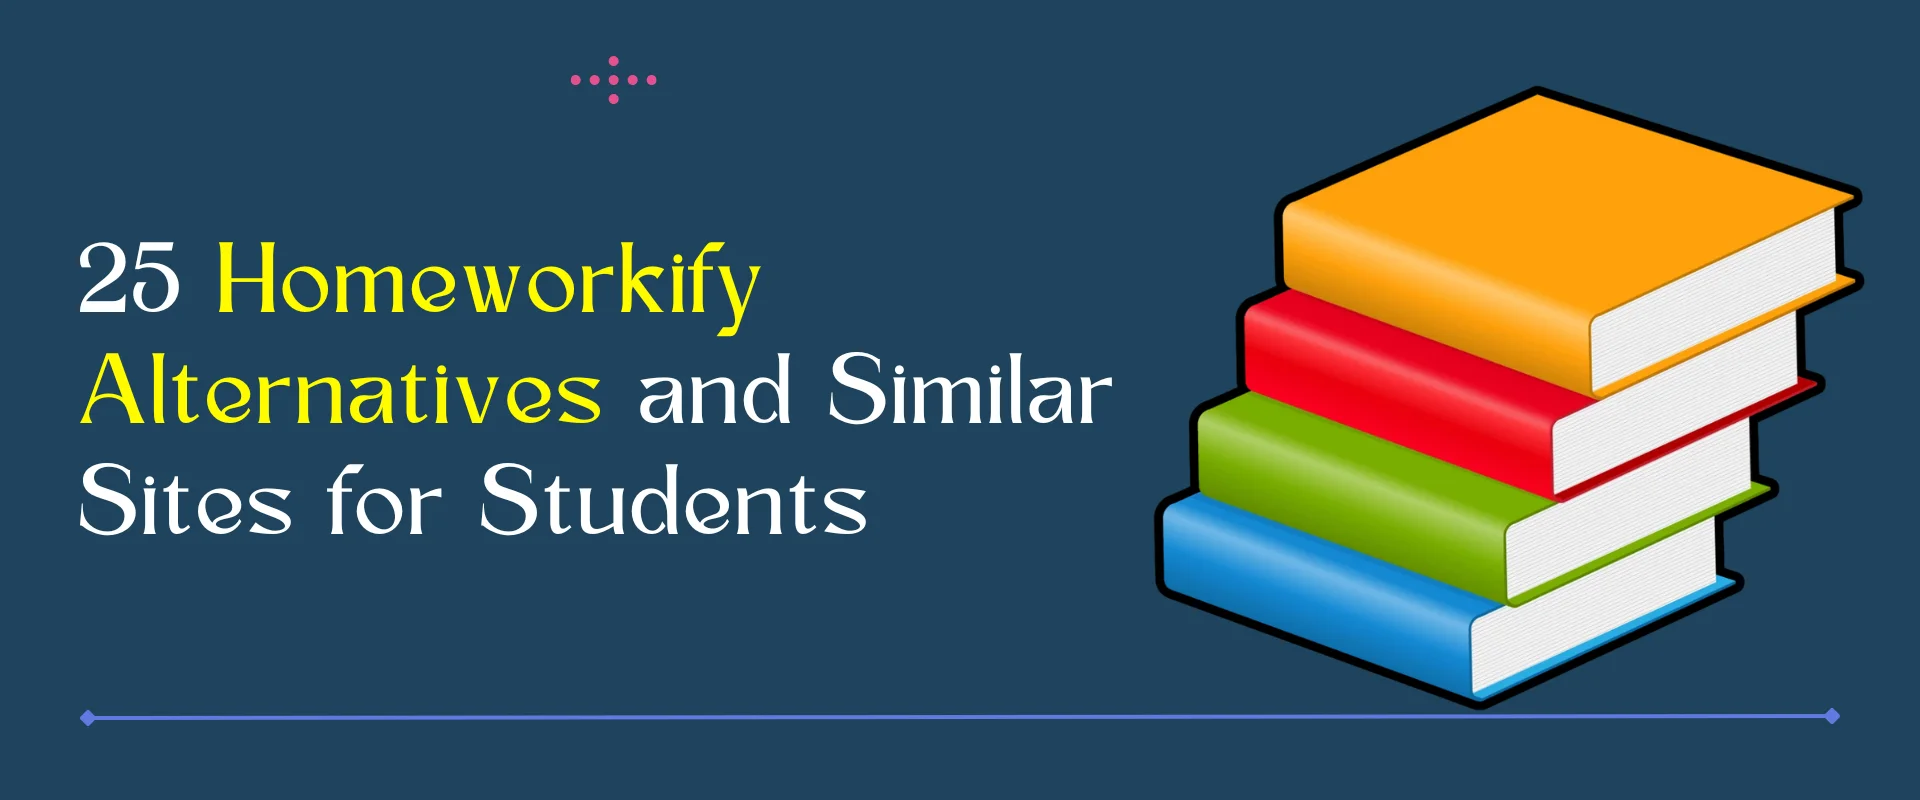 25 Homeworkify Alternatives and Similar Sites for Students